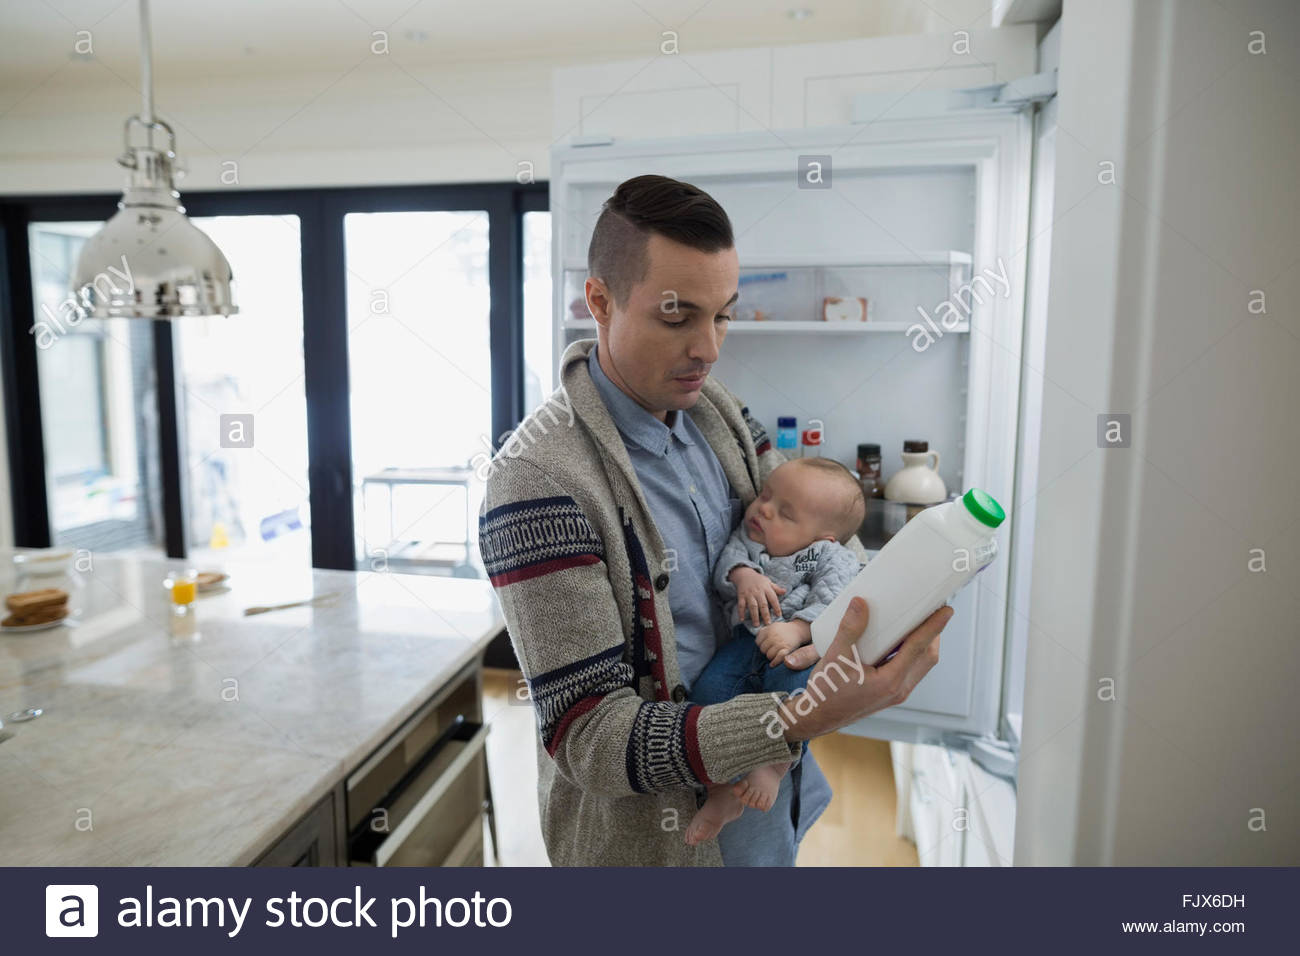 Father holding baby son checking milk at refrigerator Stock Photo